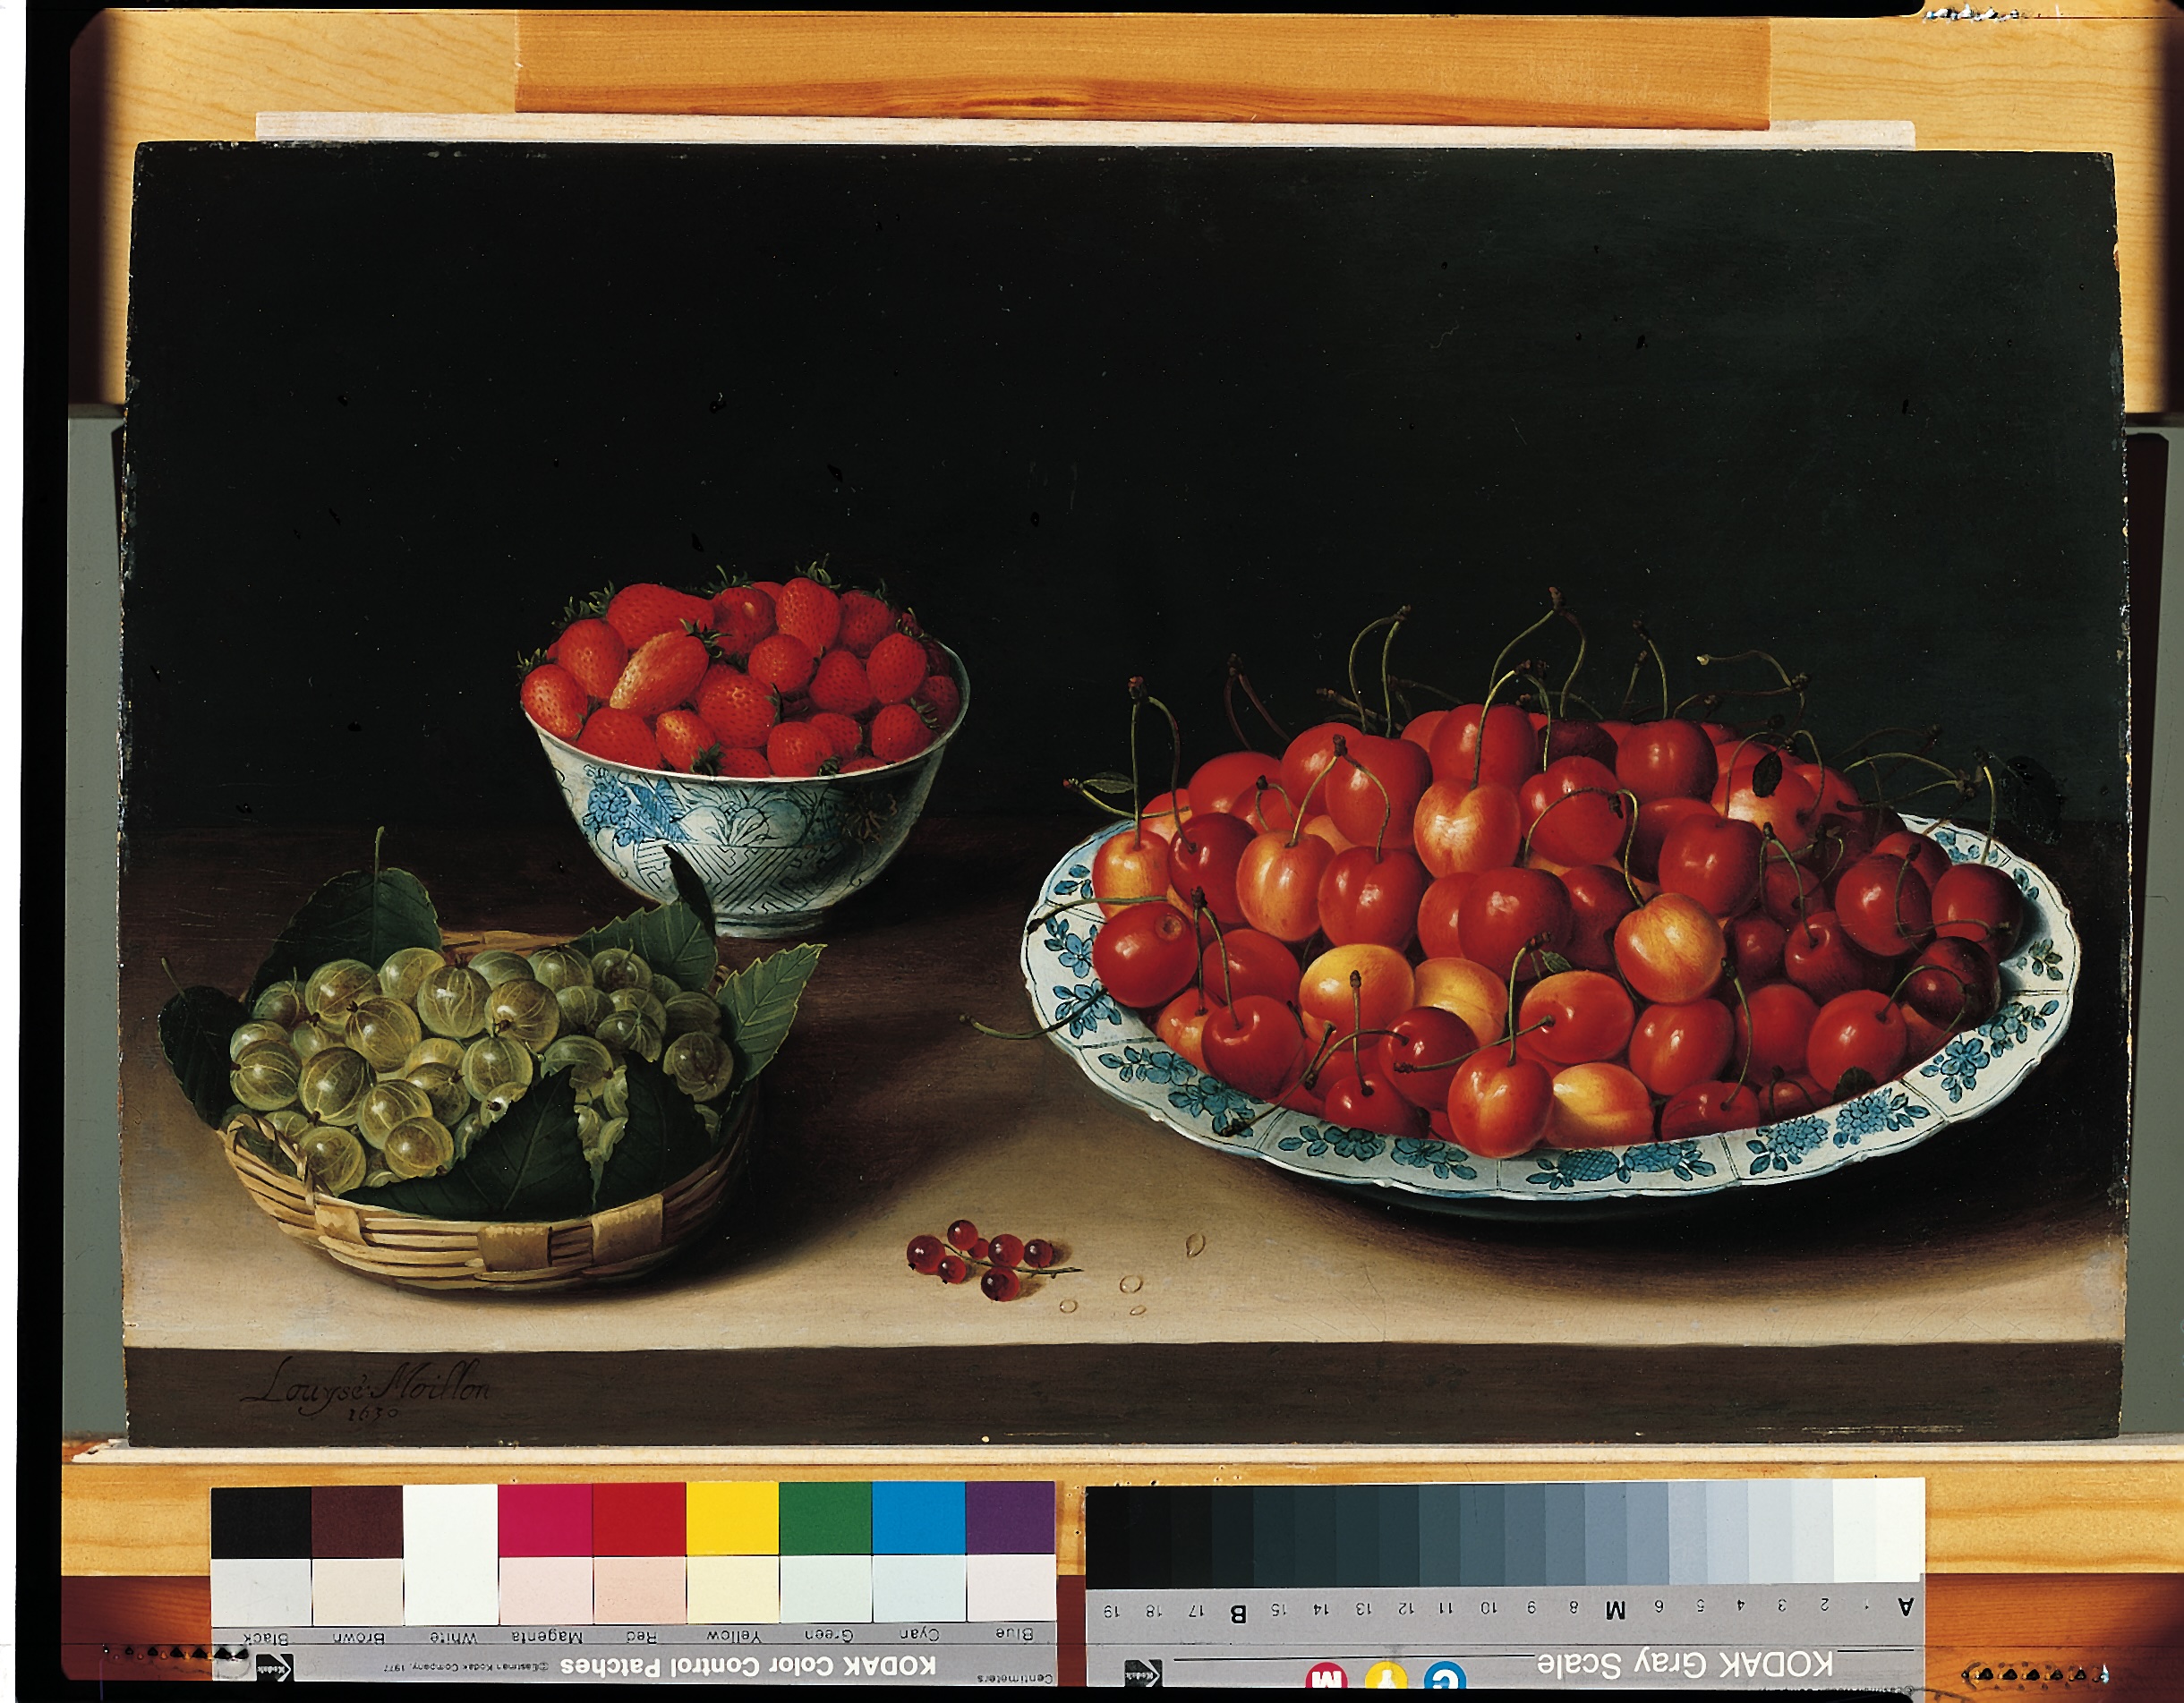 A still life painting of three bowls on a table: one is woven shallow bowl filled with gooseberries resting on a bed of leaves; another is blue and white porcelain bowl filled with strawberries; and the third is a blue and white porcelain platter filled with cherries. On the table, there are a couple loose berries and a few drops of water. The table is quite simple and the background is black.